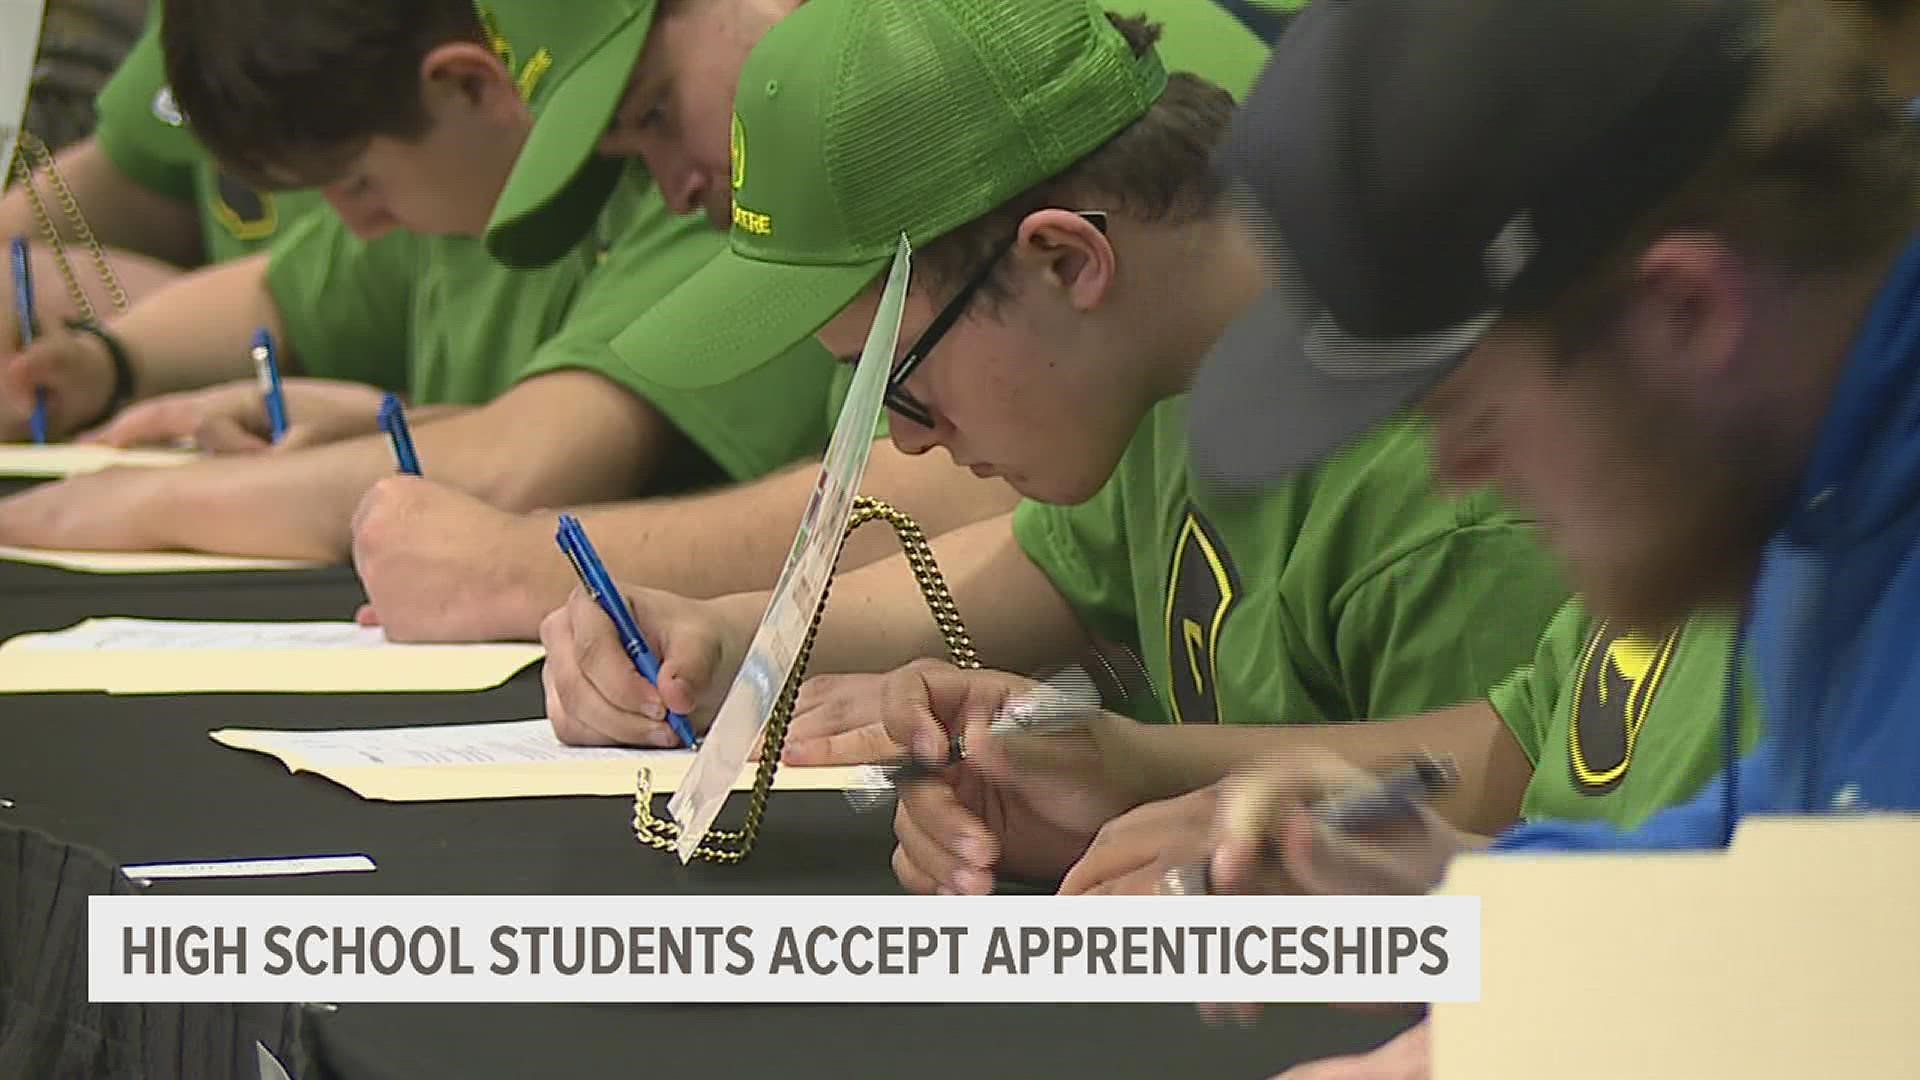 More than 60 students signed letters of intent on Wednesday to formally accept an apprenticeship. Nearly two dozen area companies made the positions available.